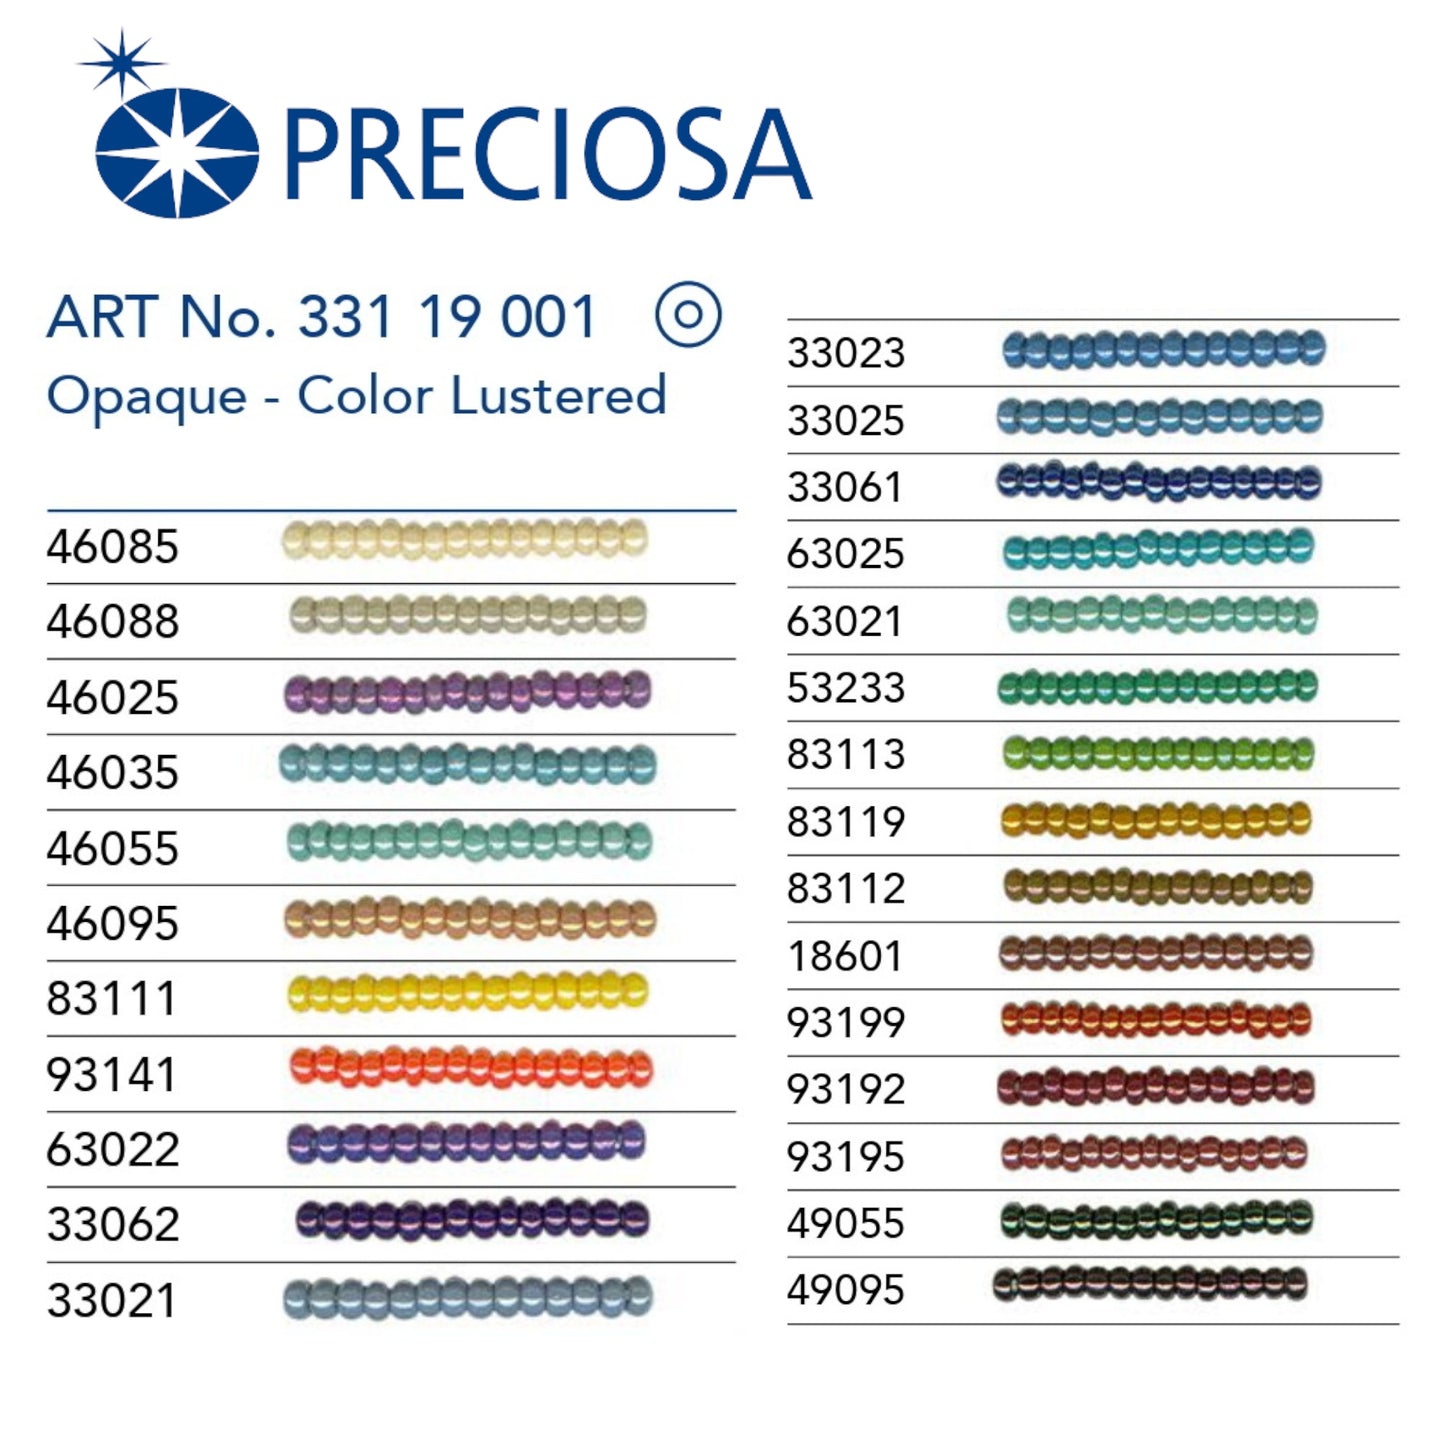 93199 Czech Seed Beads Preciosa Rocailes Opaque - Color Lustered - VadymShop